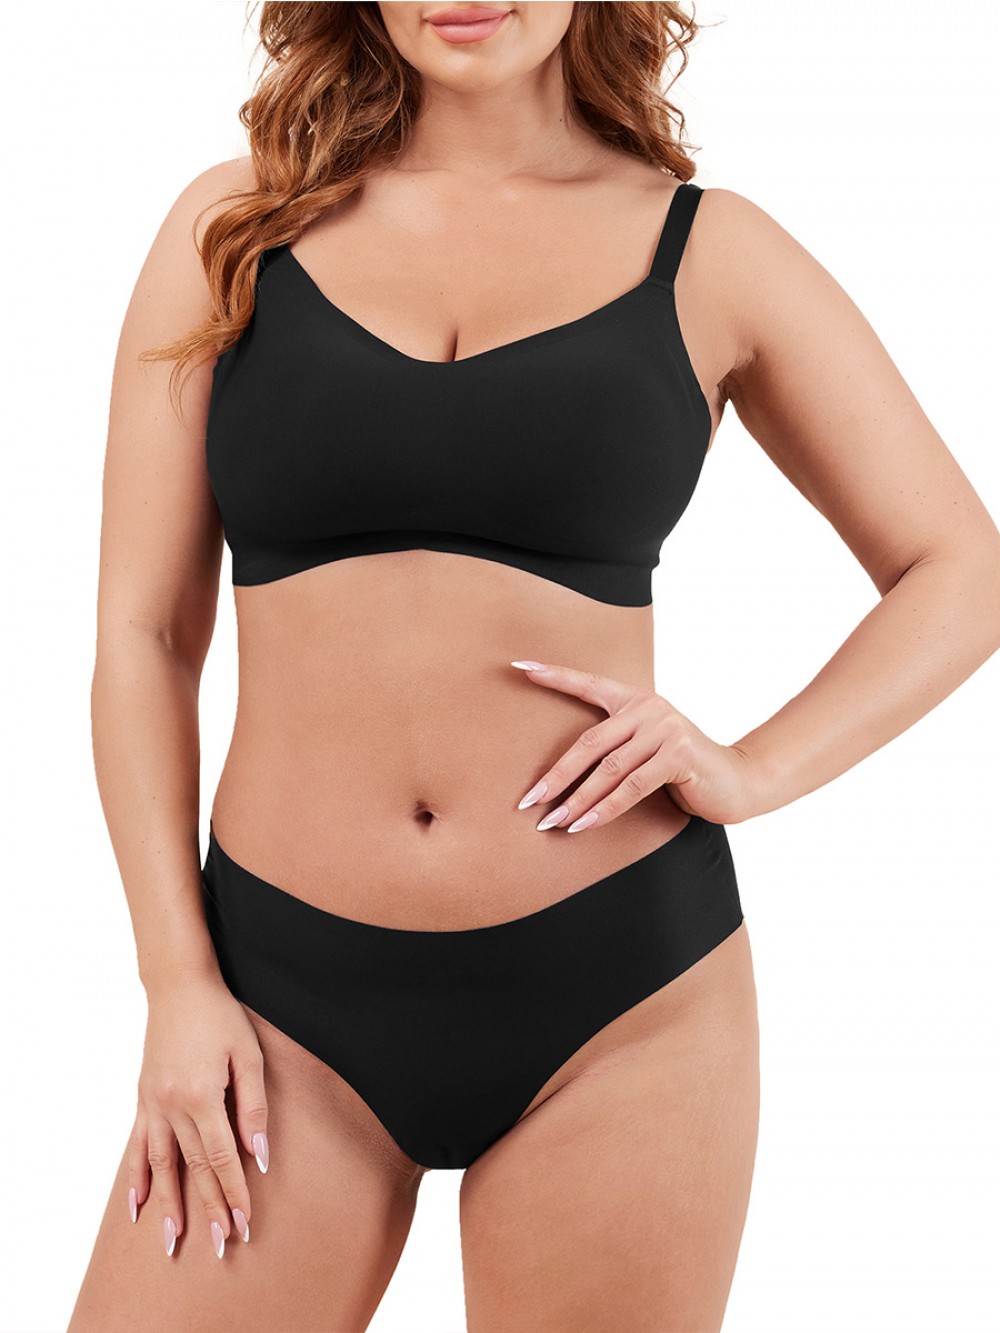 New Arrivals Seamless Breathable Push Up Bra